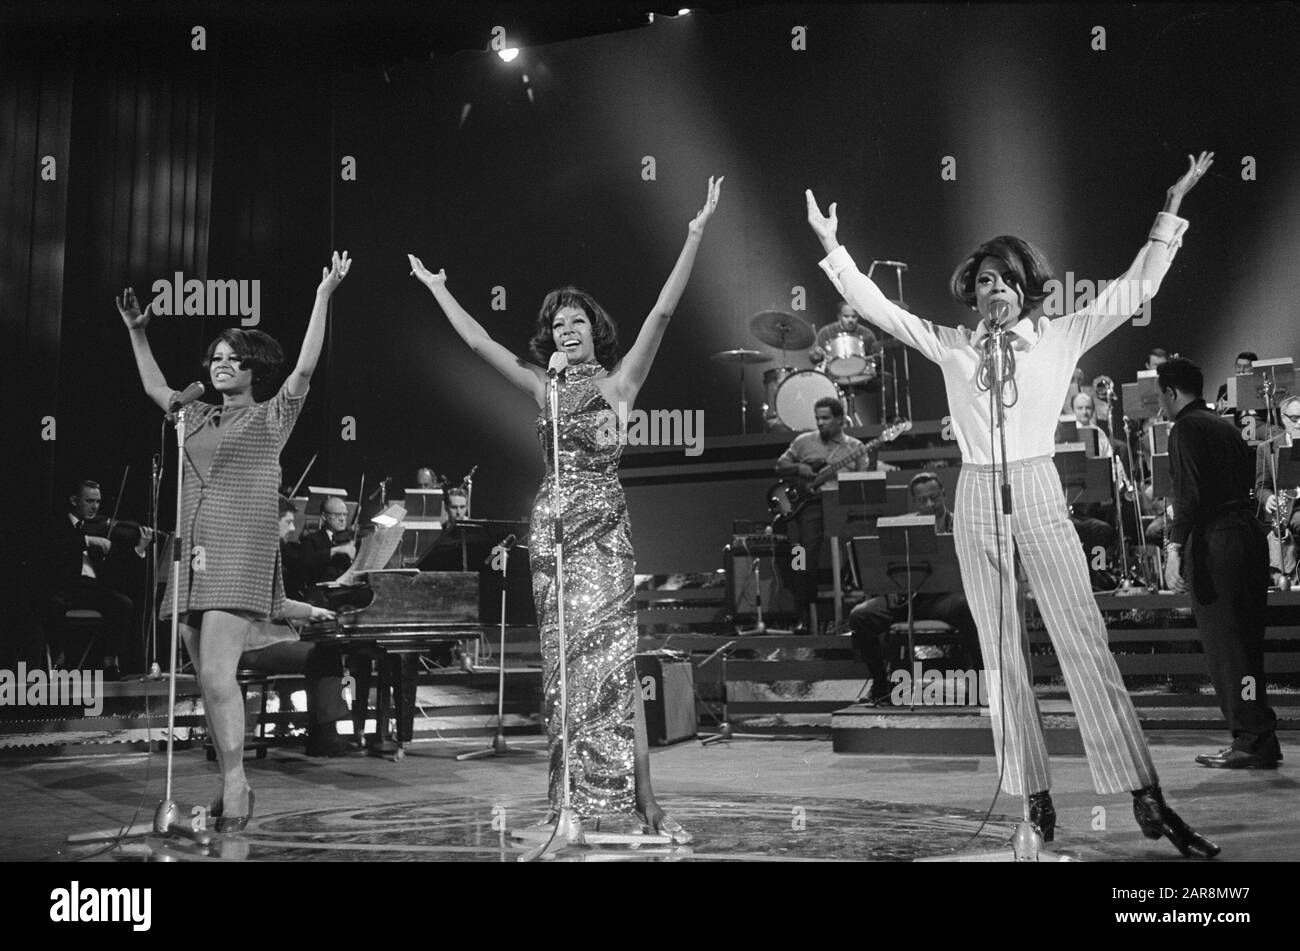 Diana Ross & The Supremes rehearsing in RAI Amsterdam (AVRO-television). L-R: Cindy Birdsong, Mary Wilson, Diana Ross.; Stock Photo